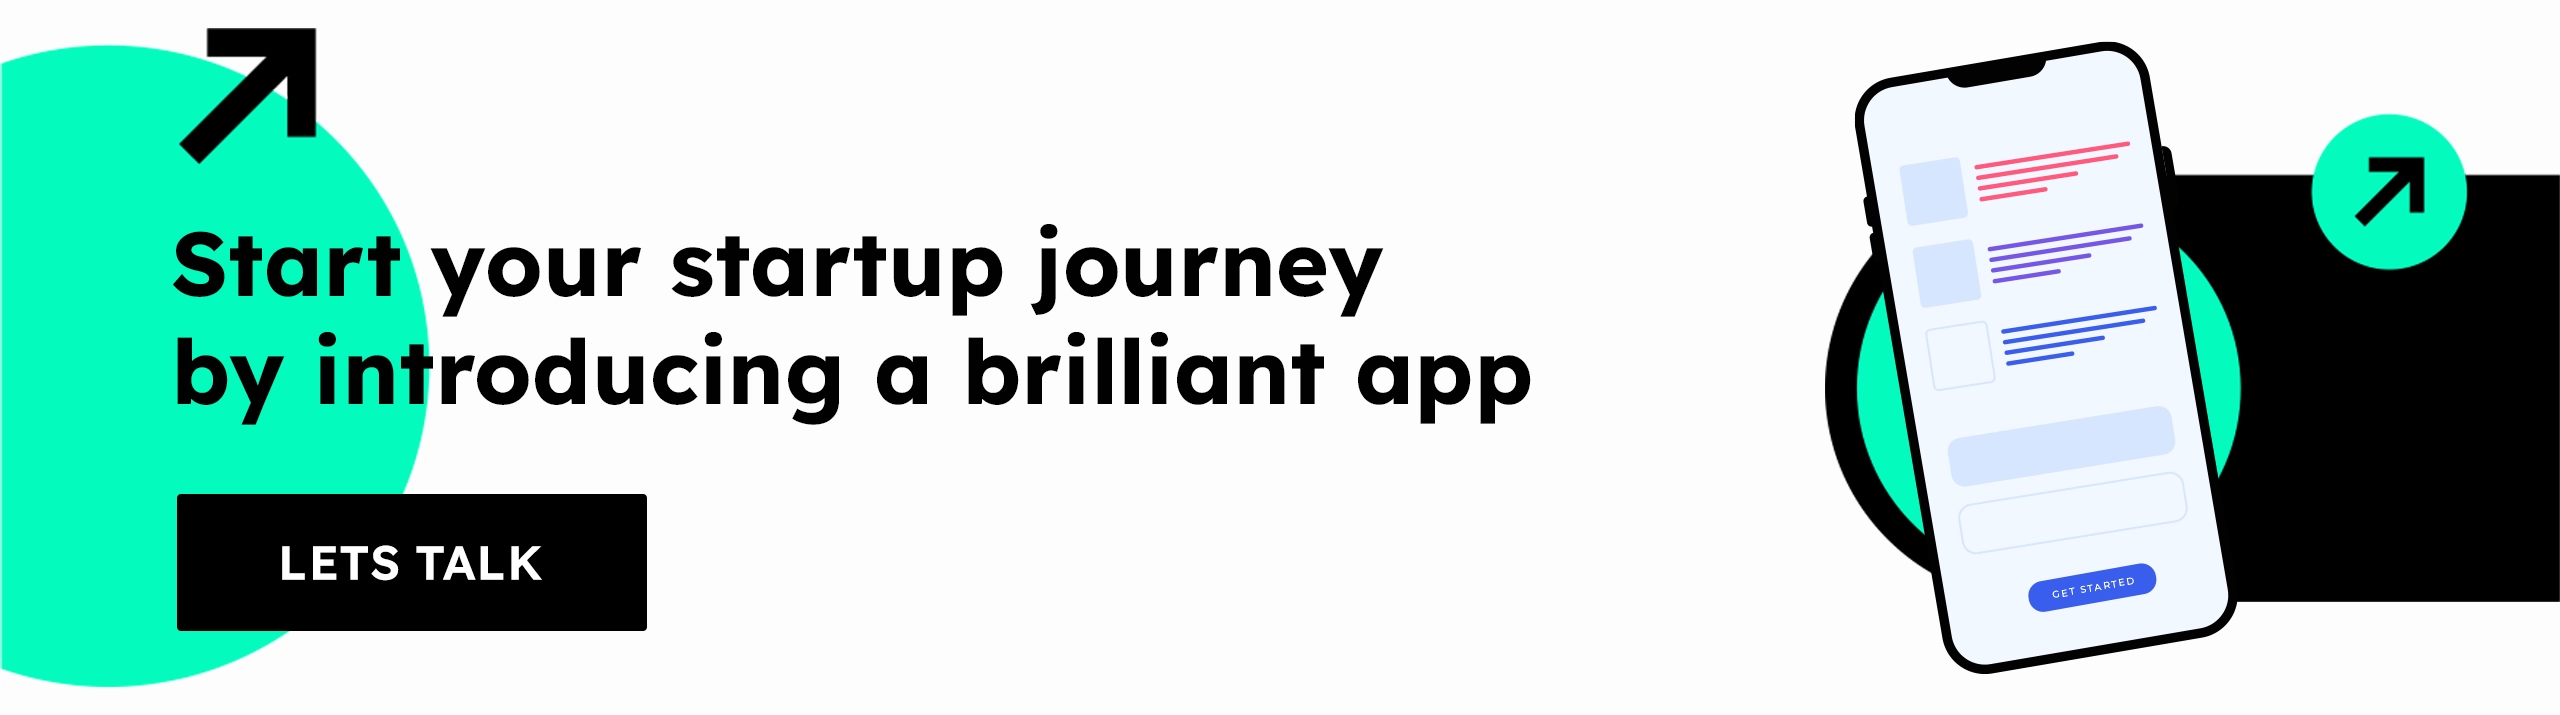 startup journey with brilliant app